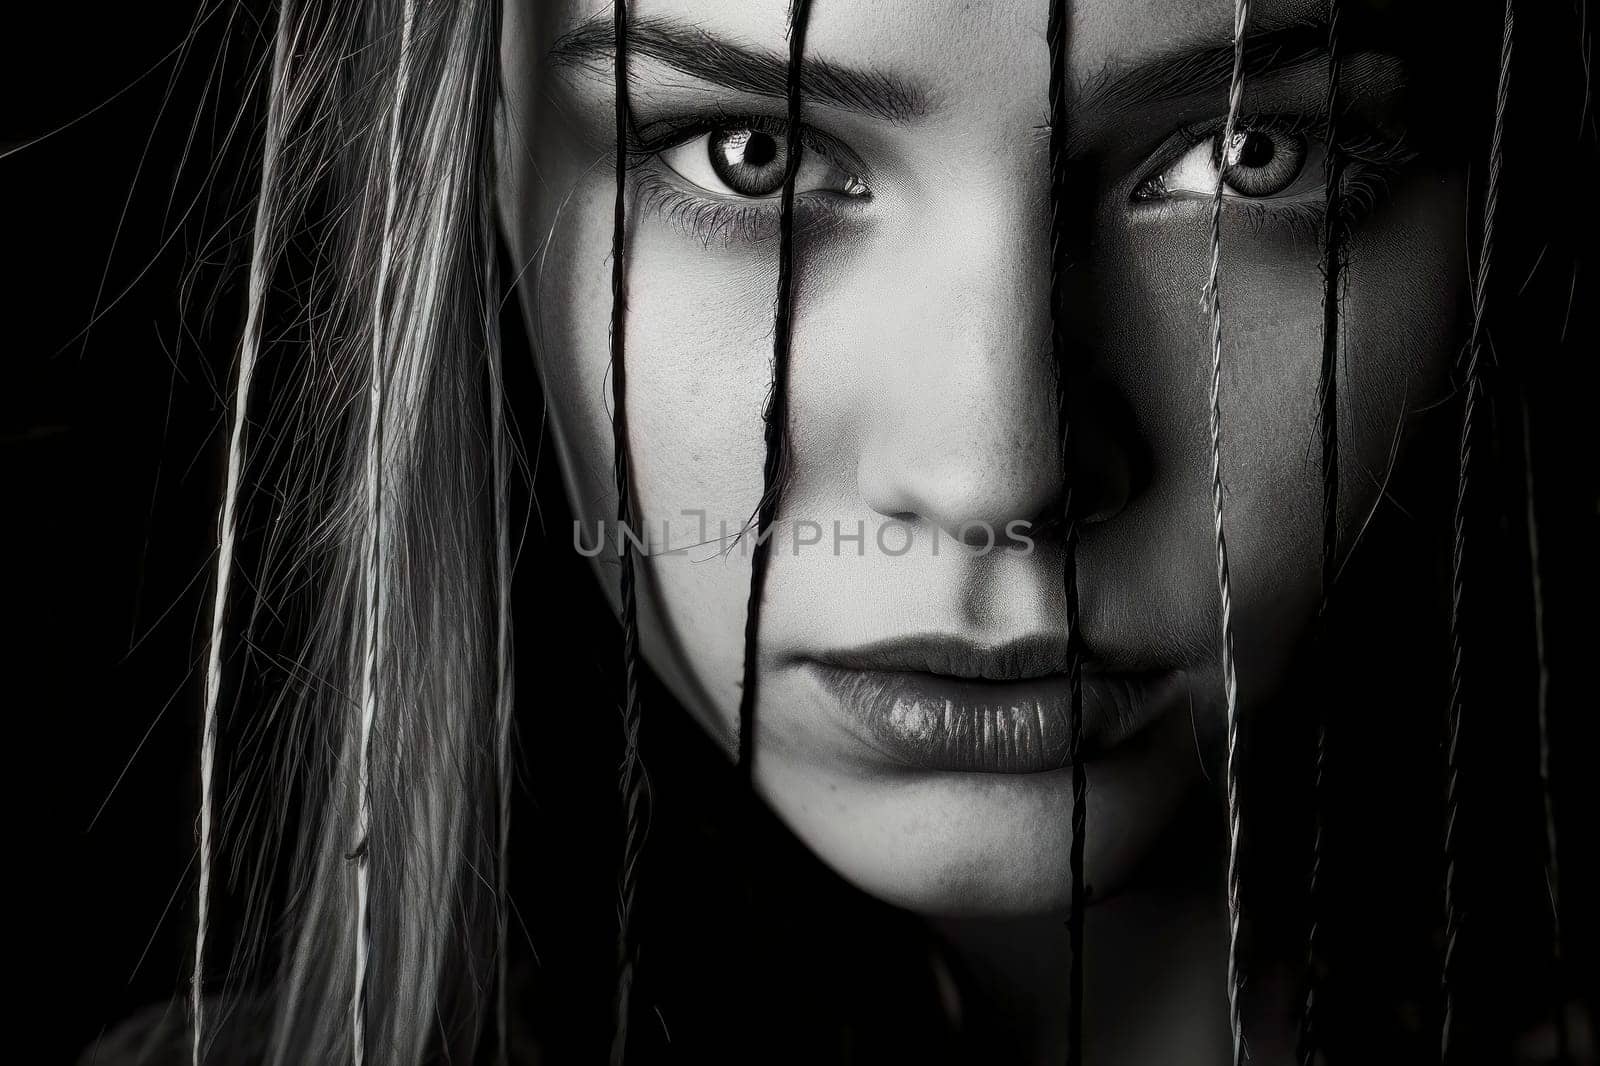 Expressive Black and White Portrait of a Girl by pippocarlot